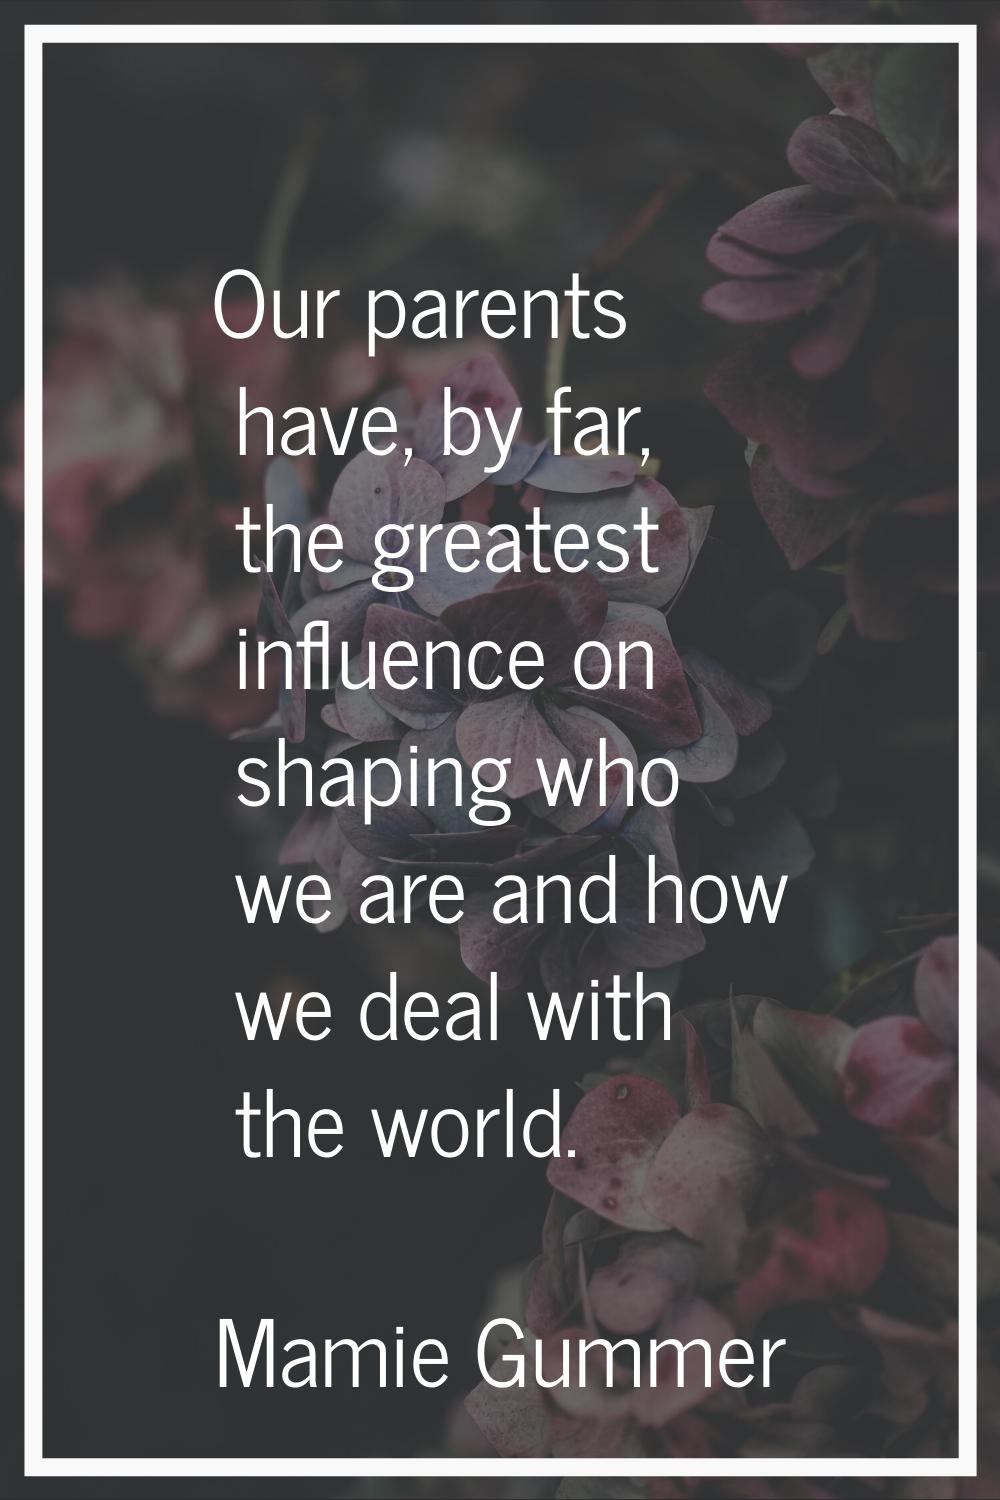 Our parents have, by far, the greatest influence on shaping who we are and how we deal with the wor